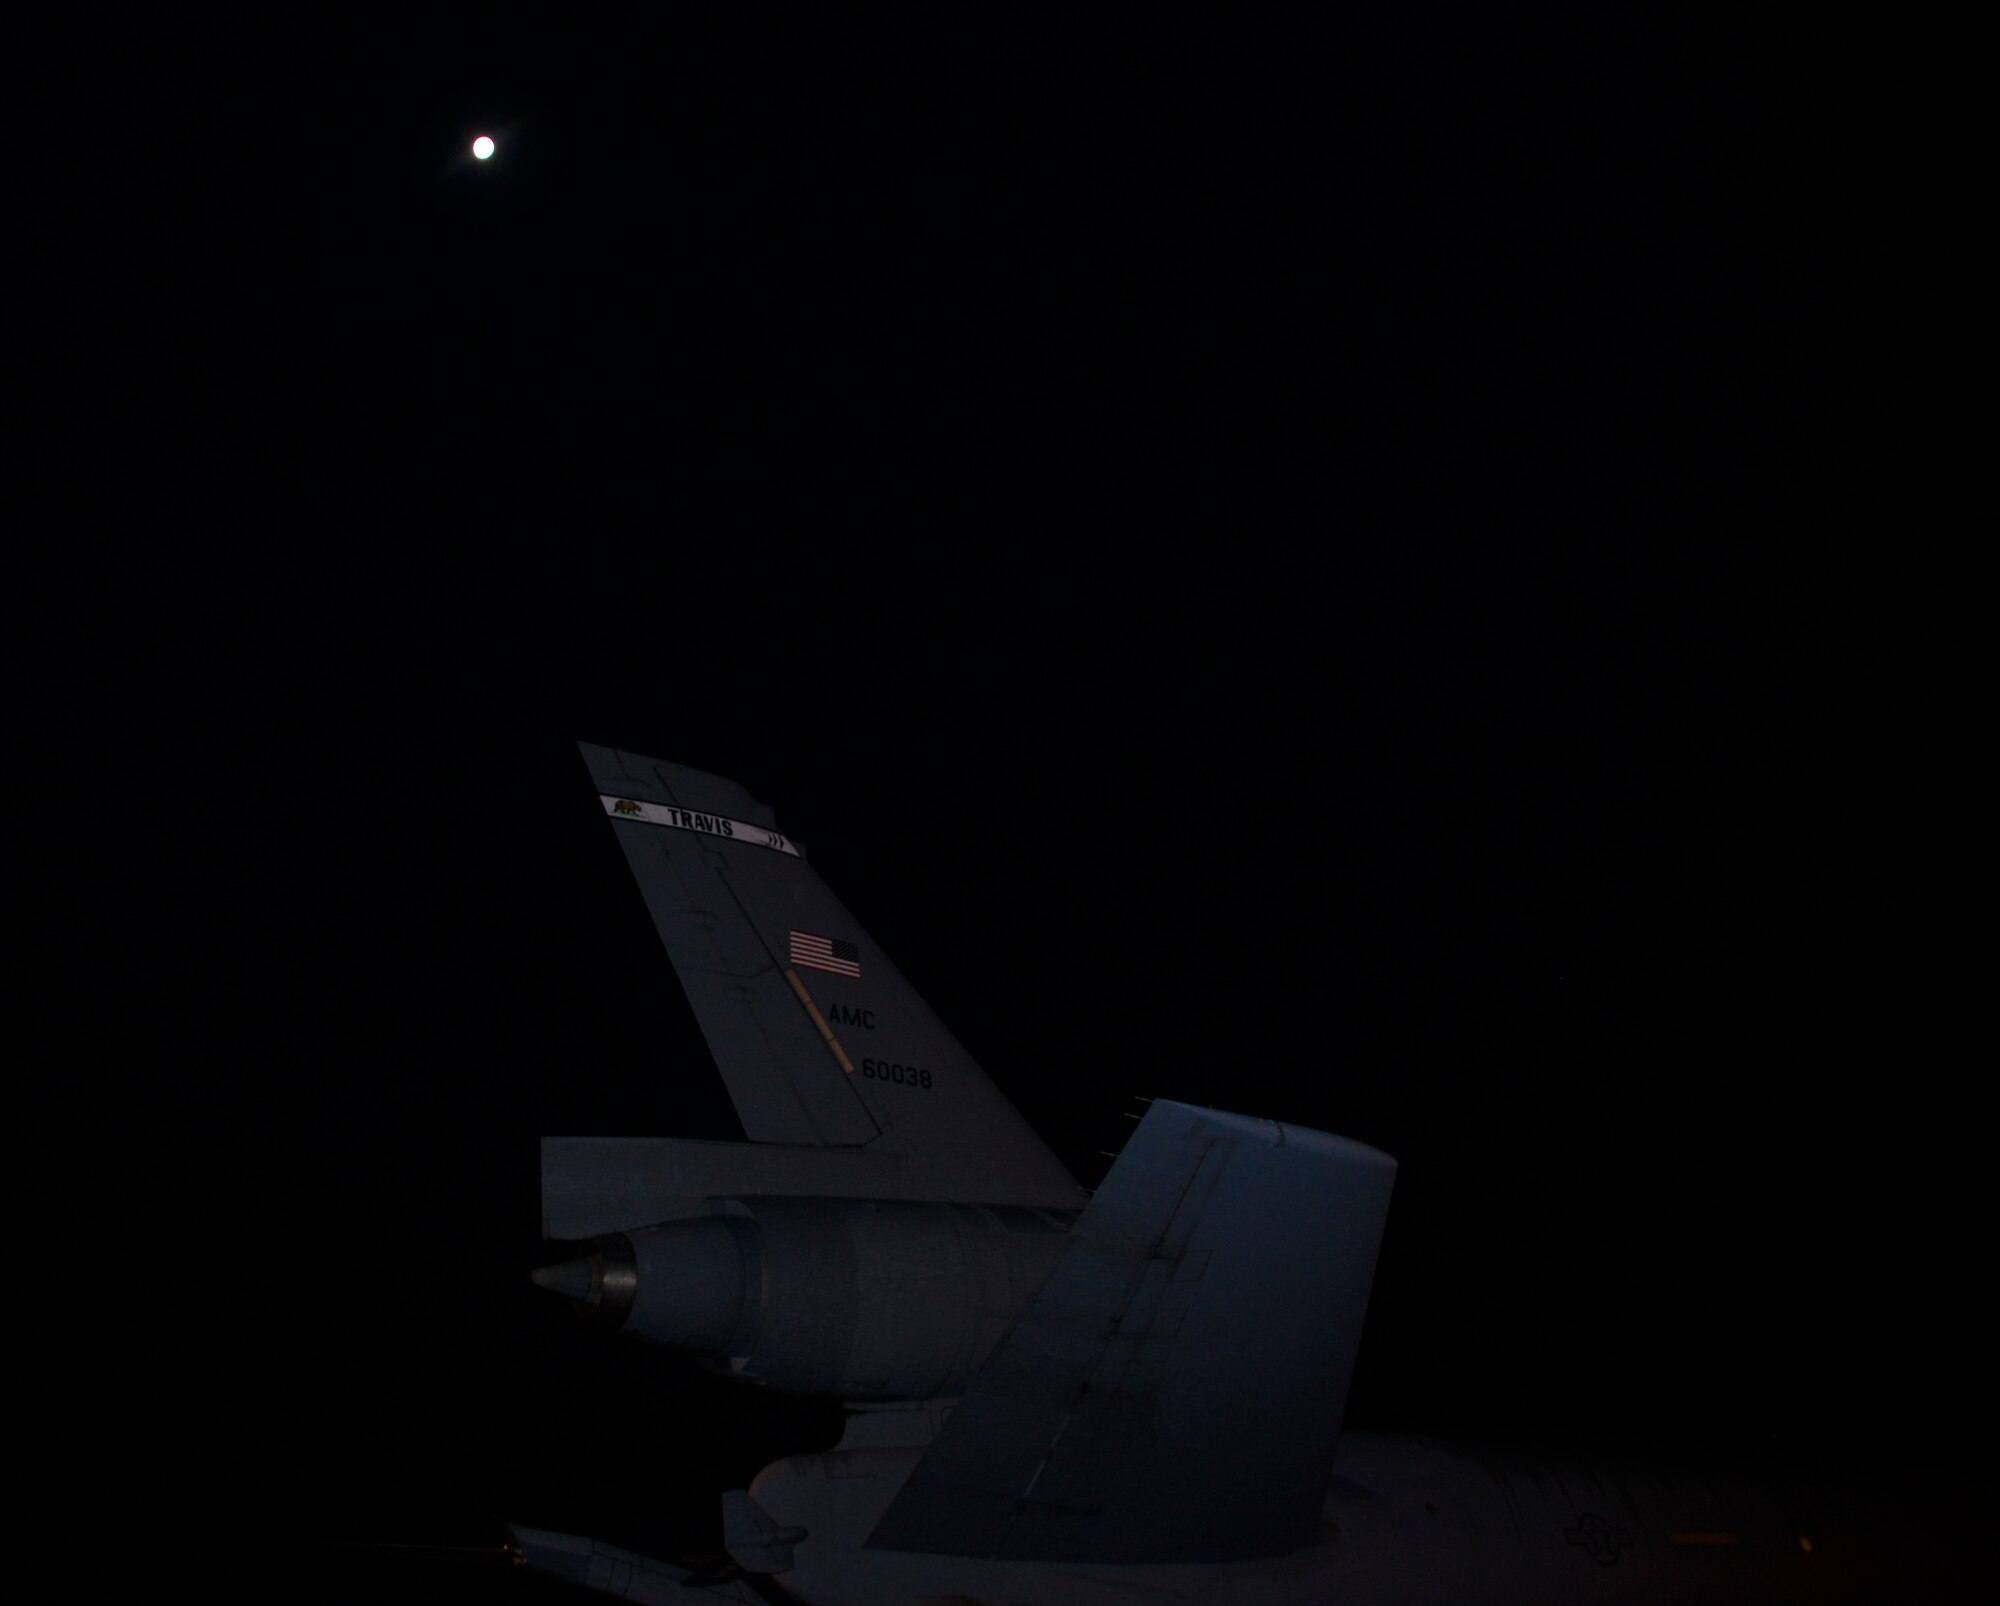 A KC-10 Extender sits ready on the runway under a full moon July 11, 2017 at Joint Base Pearl Harbor-Hickam, Hawaii. A combined crew from the 6th and 9th ARS at Travis Air Force Base supported Exercise Talisman Saber 2017 by executing Exercise Ultimate Reach, a strategic refueling and airdrop mission in which three KC-10s refueled five C-17 Globemaster IIIs carrying U.S. Army, Australian and Canadian paratroopers prior to an airdrop. TS 17 is a biennial exercise in Australia that focuses on bilateral military training between U.S. Pacific Command forces and the Australian Defence Force to improve U.S.-Australia combat readiness, increase interoperability, maximize combined training opportunities and conduct maritime prepositioning and logistics operations in the Pacific. (U.S. Air Force photo by 2nd Lt. Sarah Johnson)